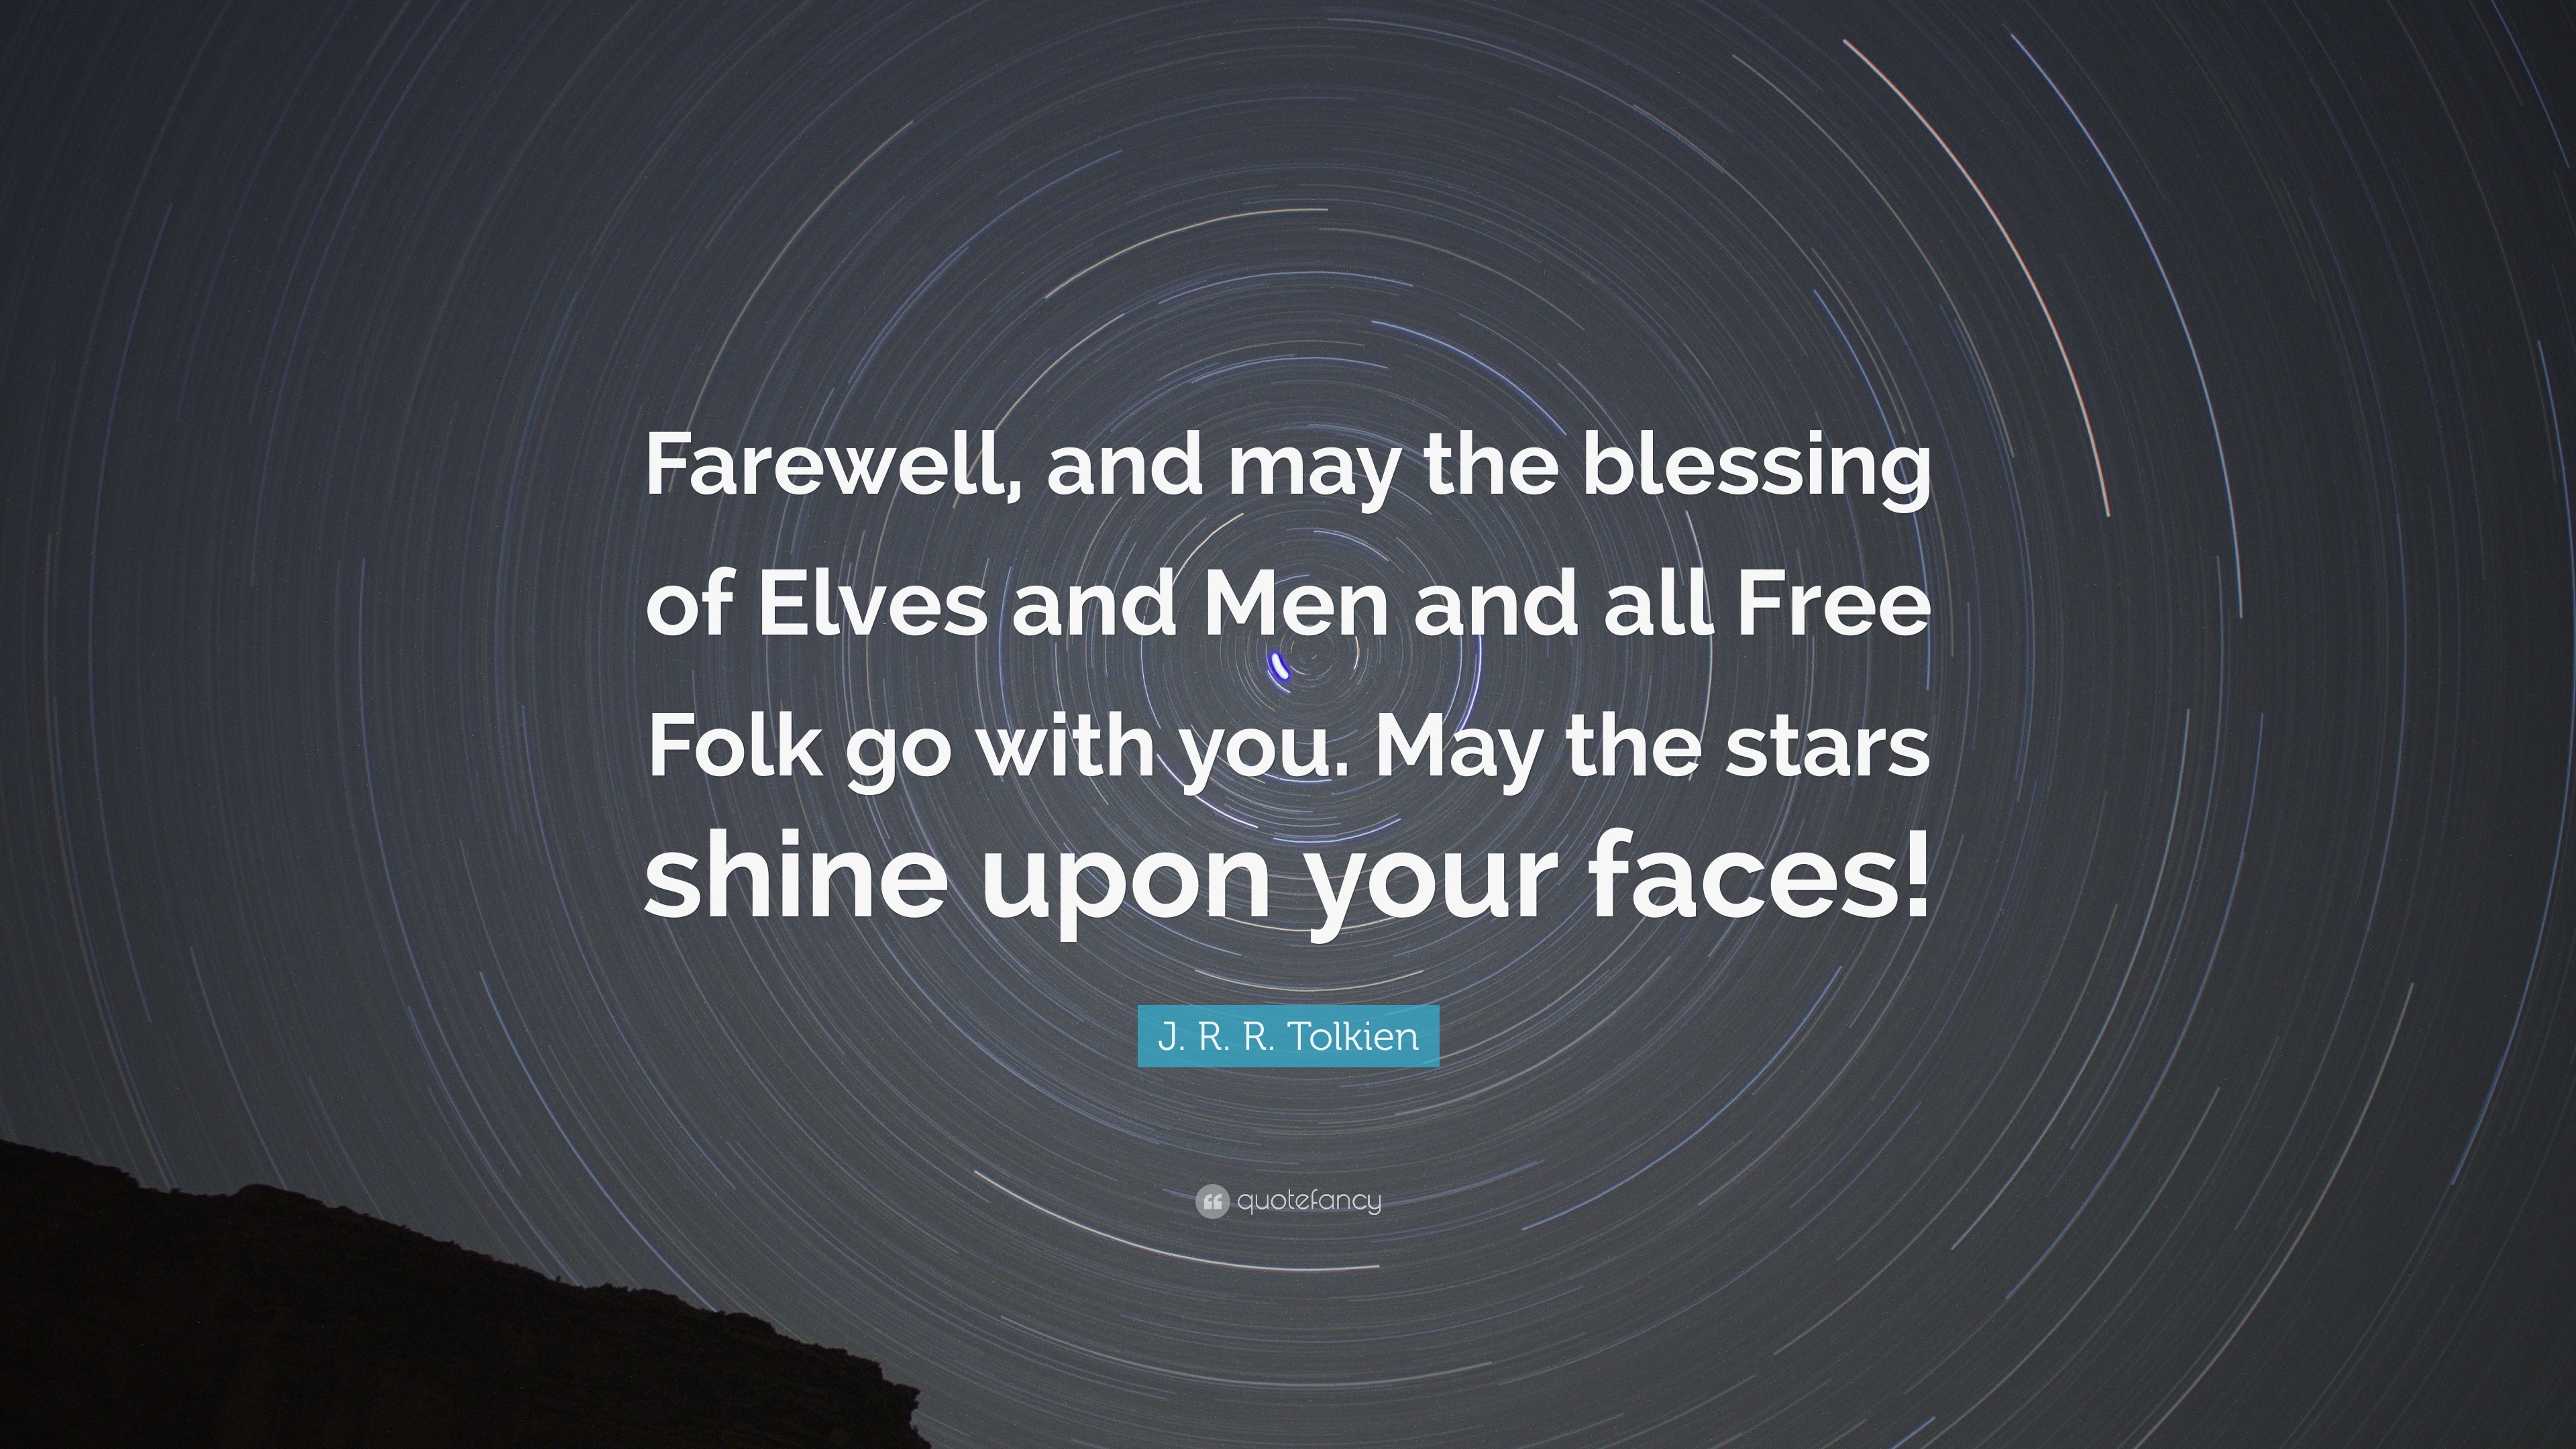 3840x2160 J. R. R. Tolkien Quote: “Farewell, and may the blessing of Elves and Men and